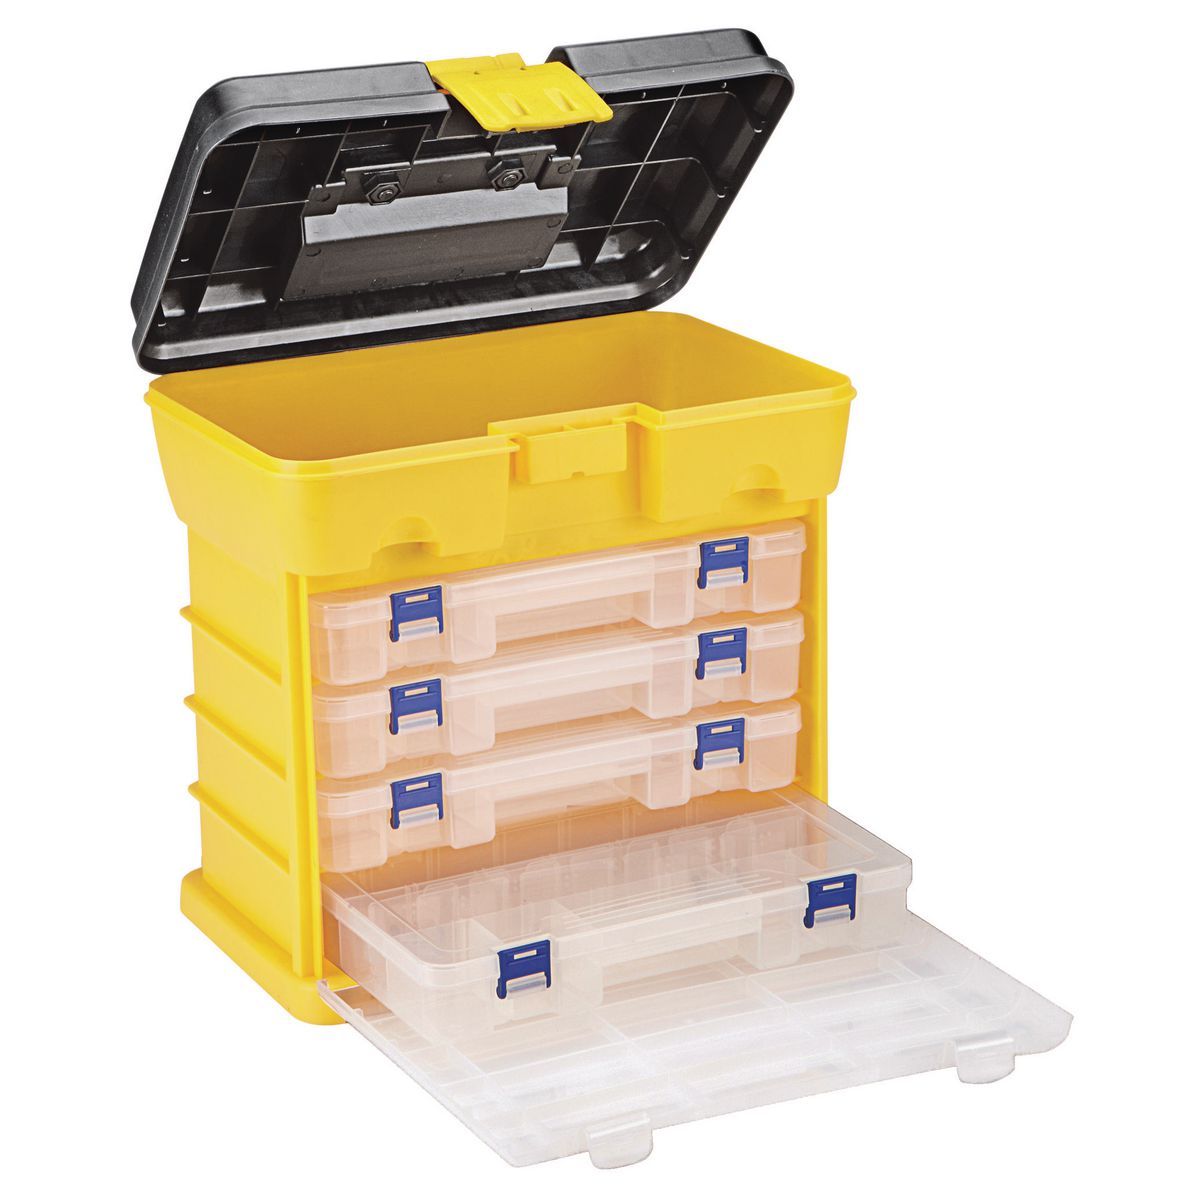 STOREHOUSE Toolbox Organizer with 4 Drawers - Item 68238 / 95466